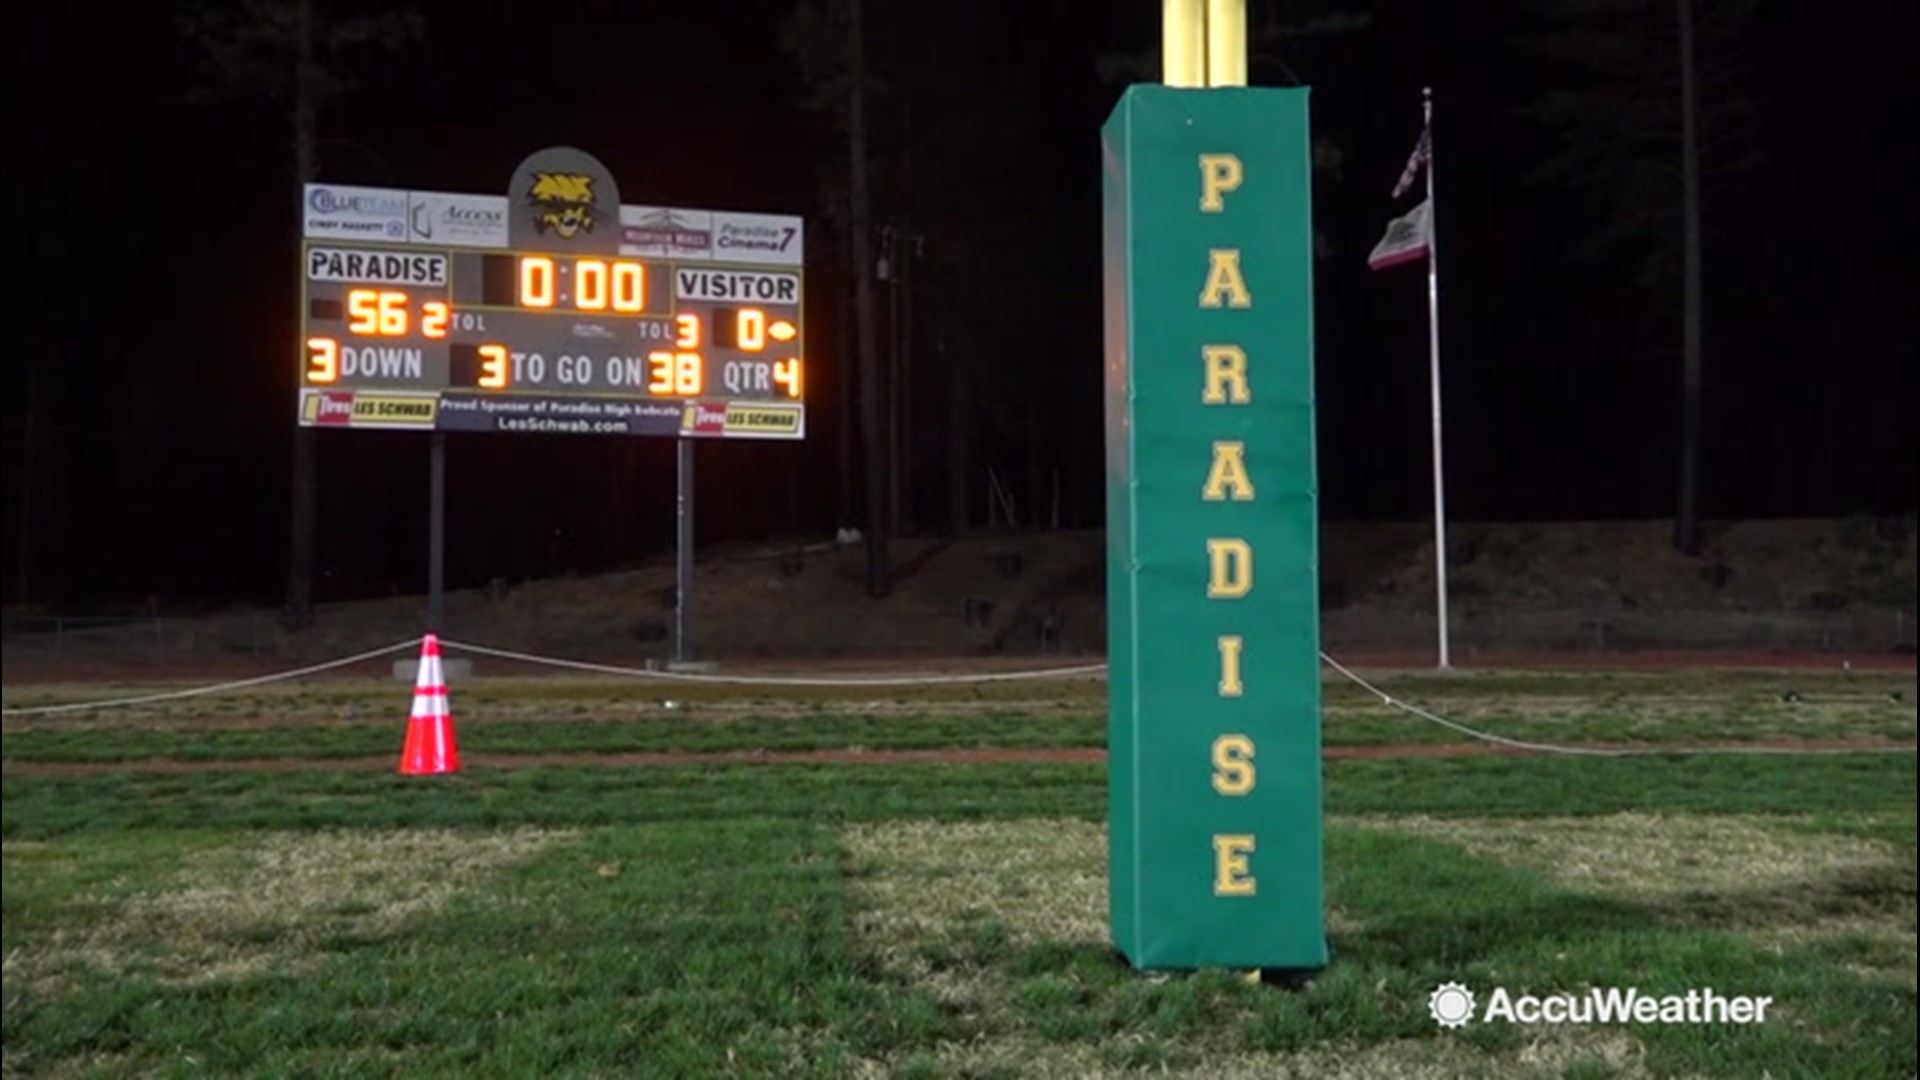 It's been a tough year for many families in Paradise, California, but this weekend, the town is celebrating a big win as its high school team takes another step to becoming the best in the state. Bill Wadell has more as this community came together to support a team that represented their town by never giving up.